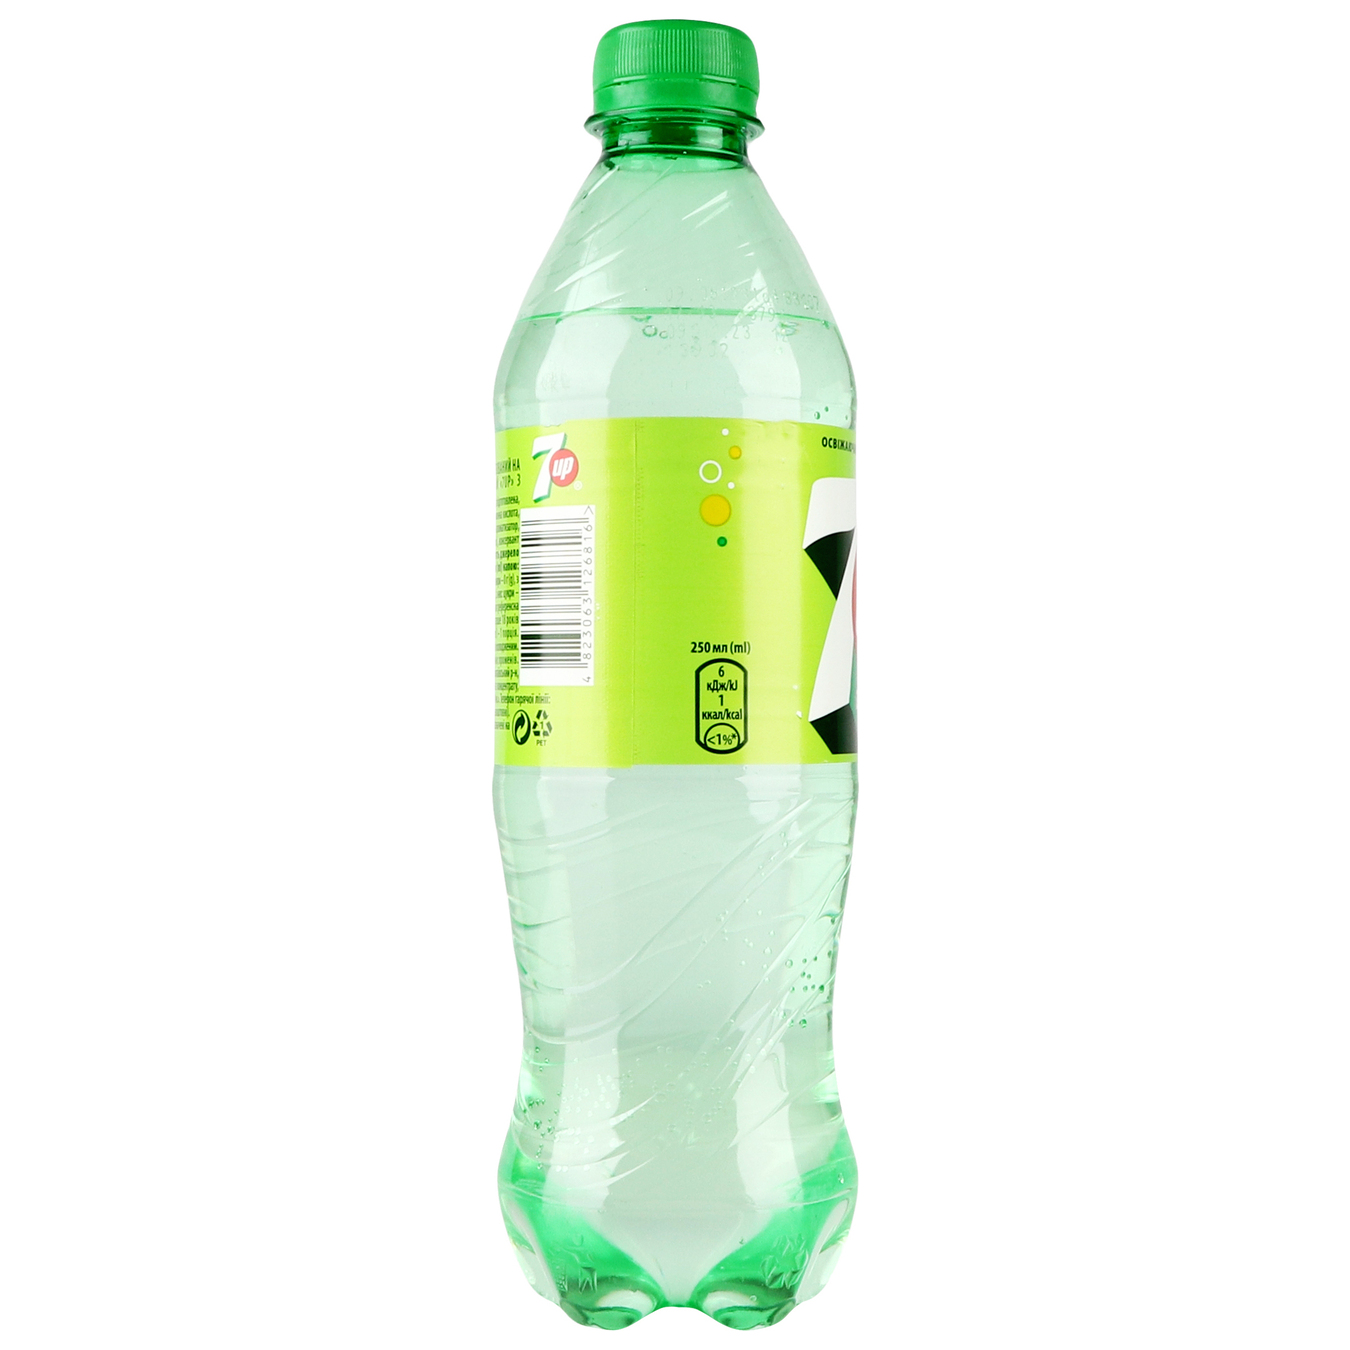 Carbonated drink 7 UP Free 0.5l 2